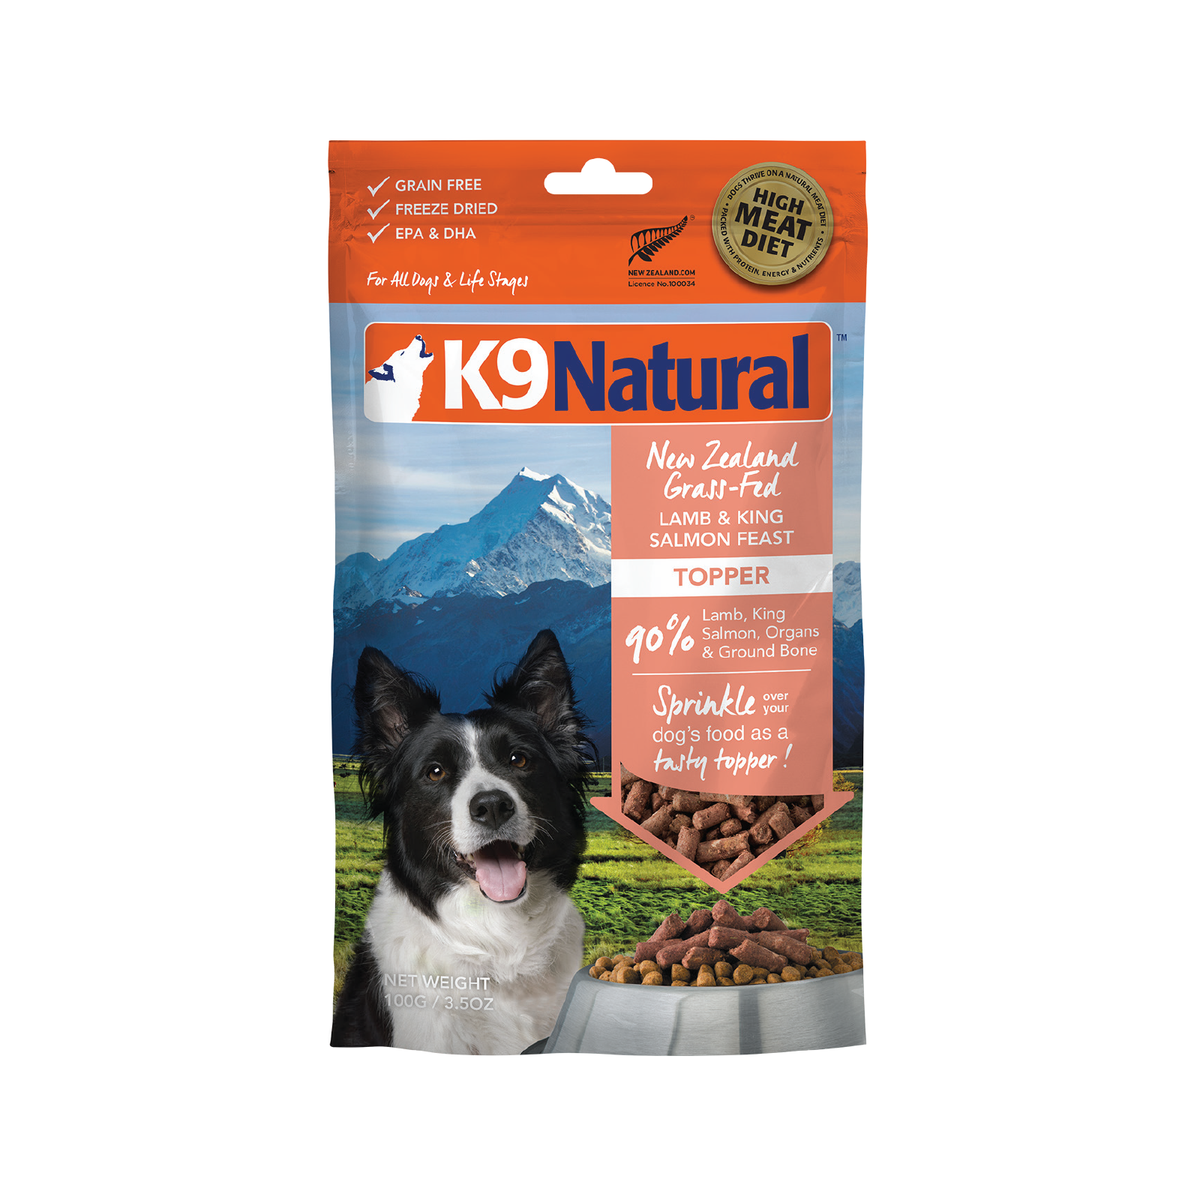 K9 Natural Lamb and Salmon Feast Topper